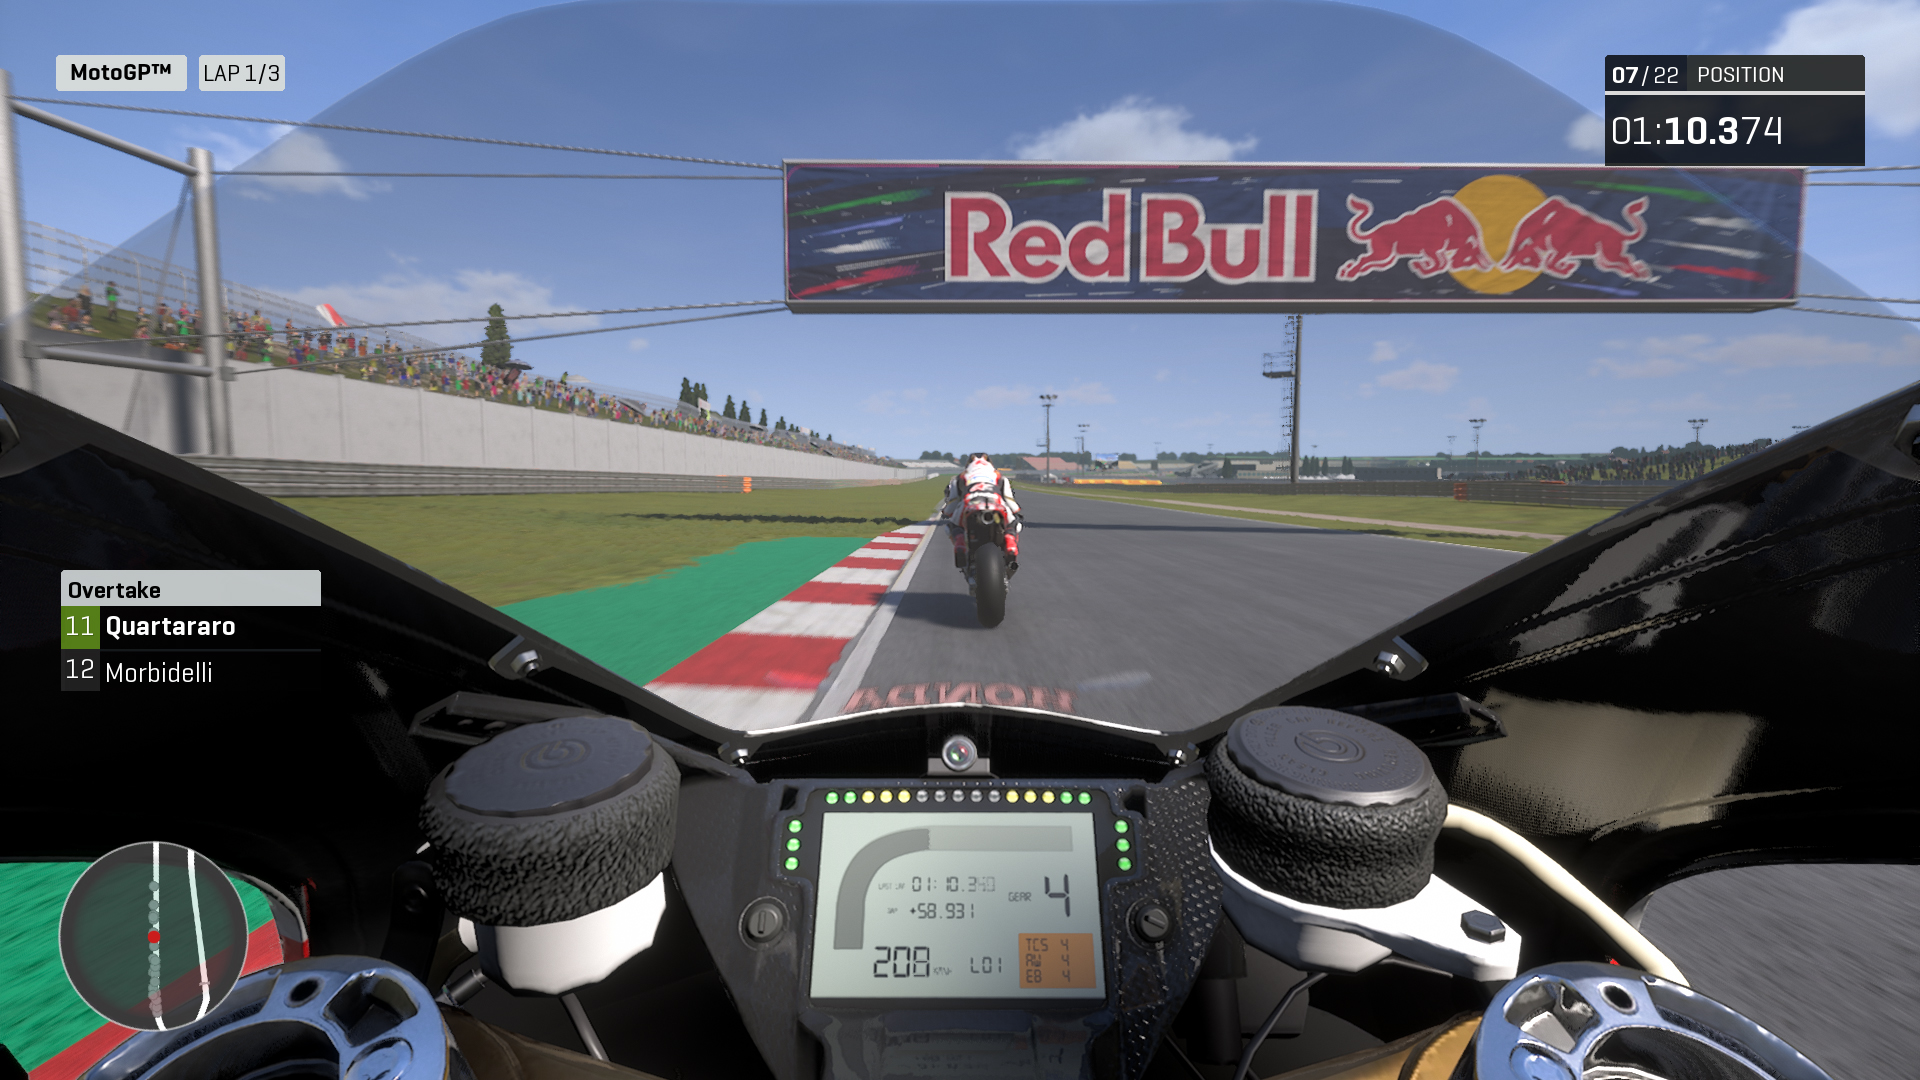 MotoGP 19 stream highlights all of the new features